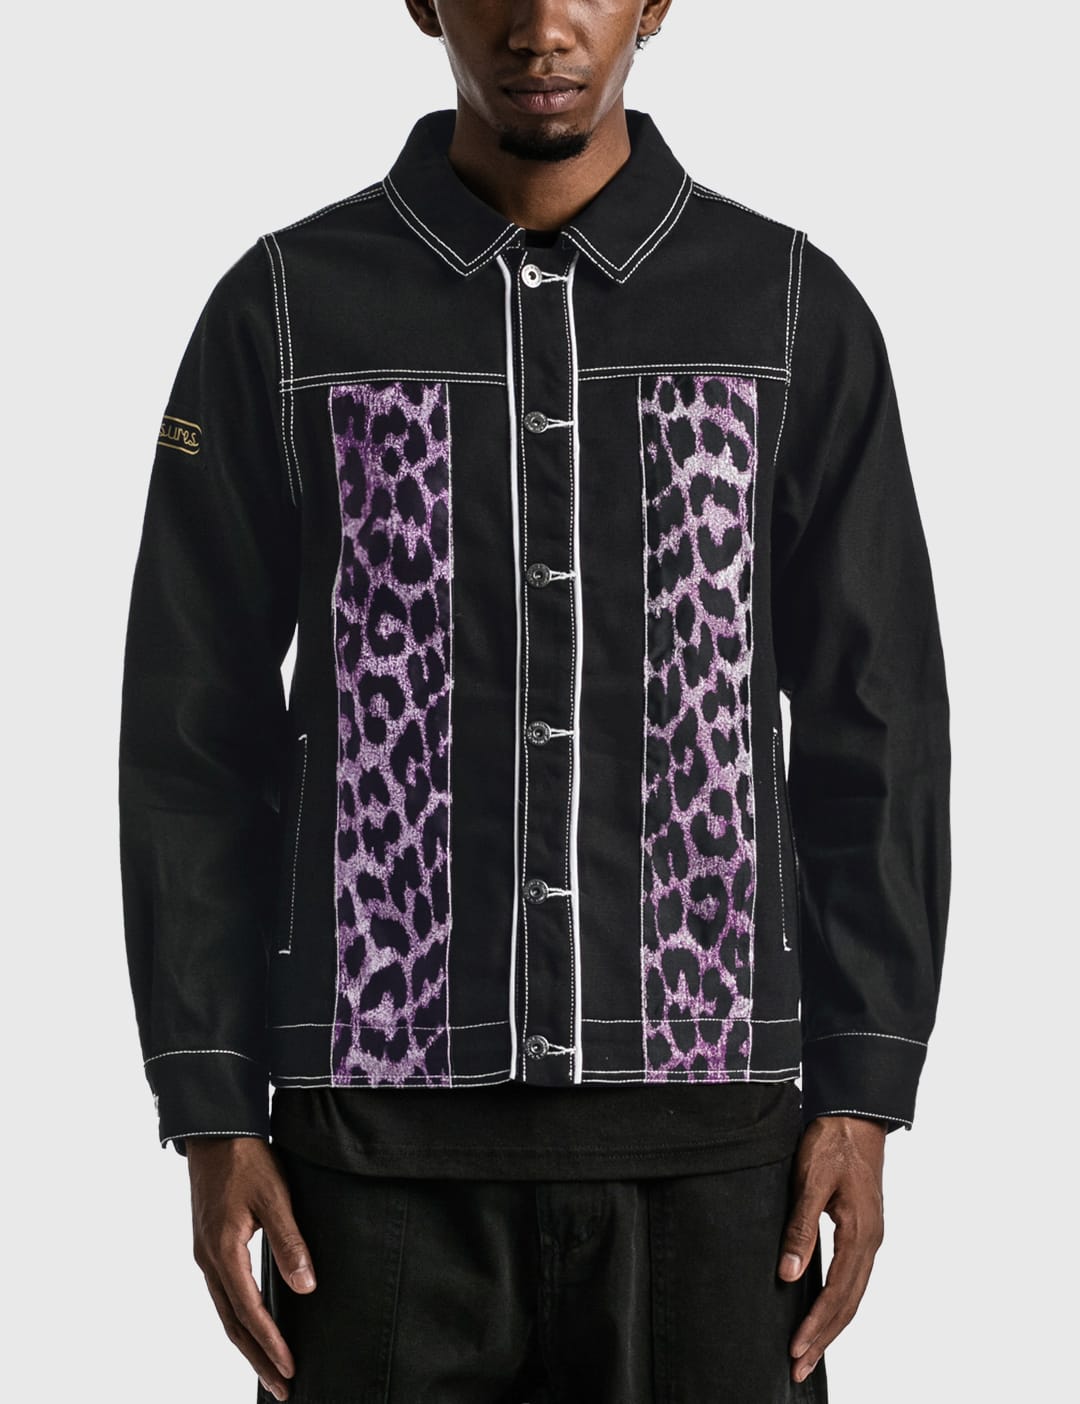 Pleasures - Distortion Jacket | HBX - Globally Curated Fashion and